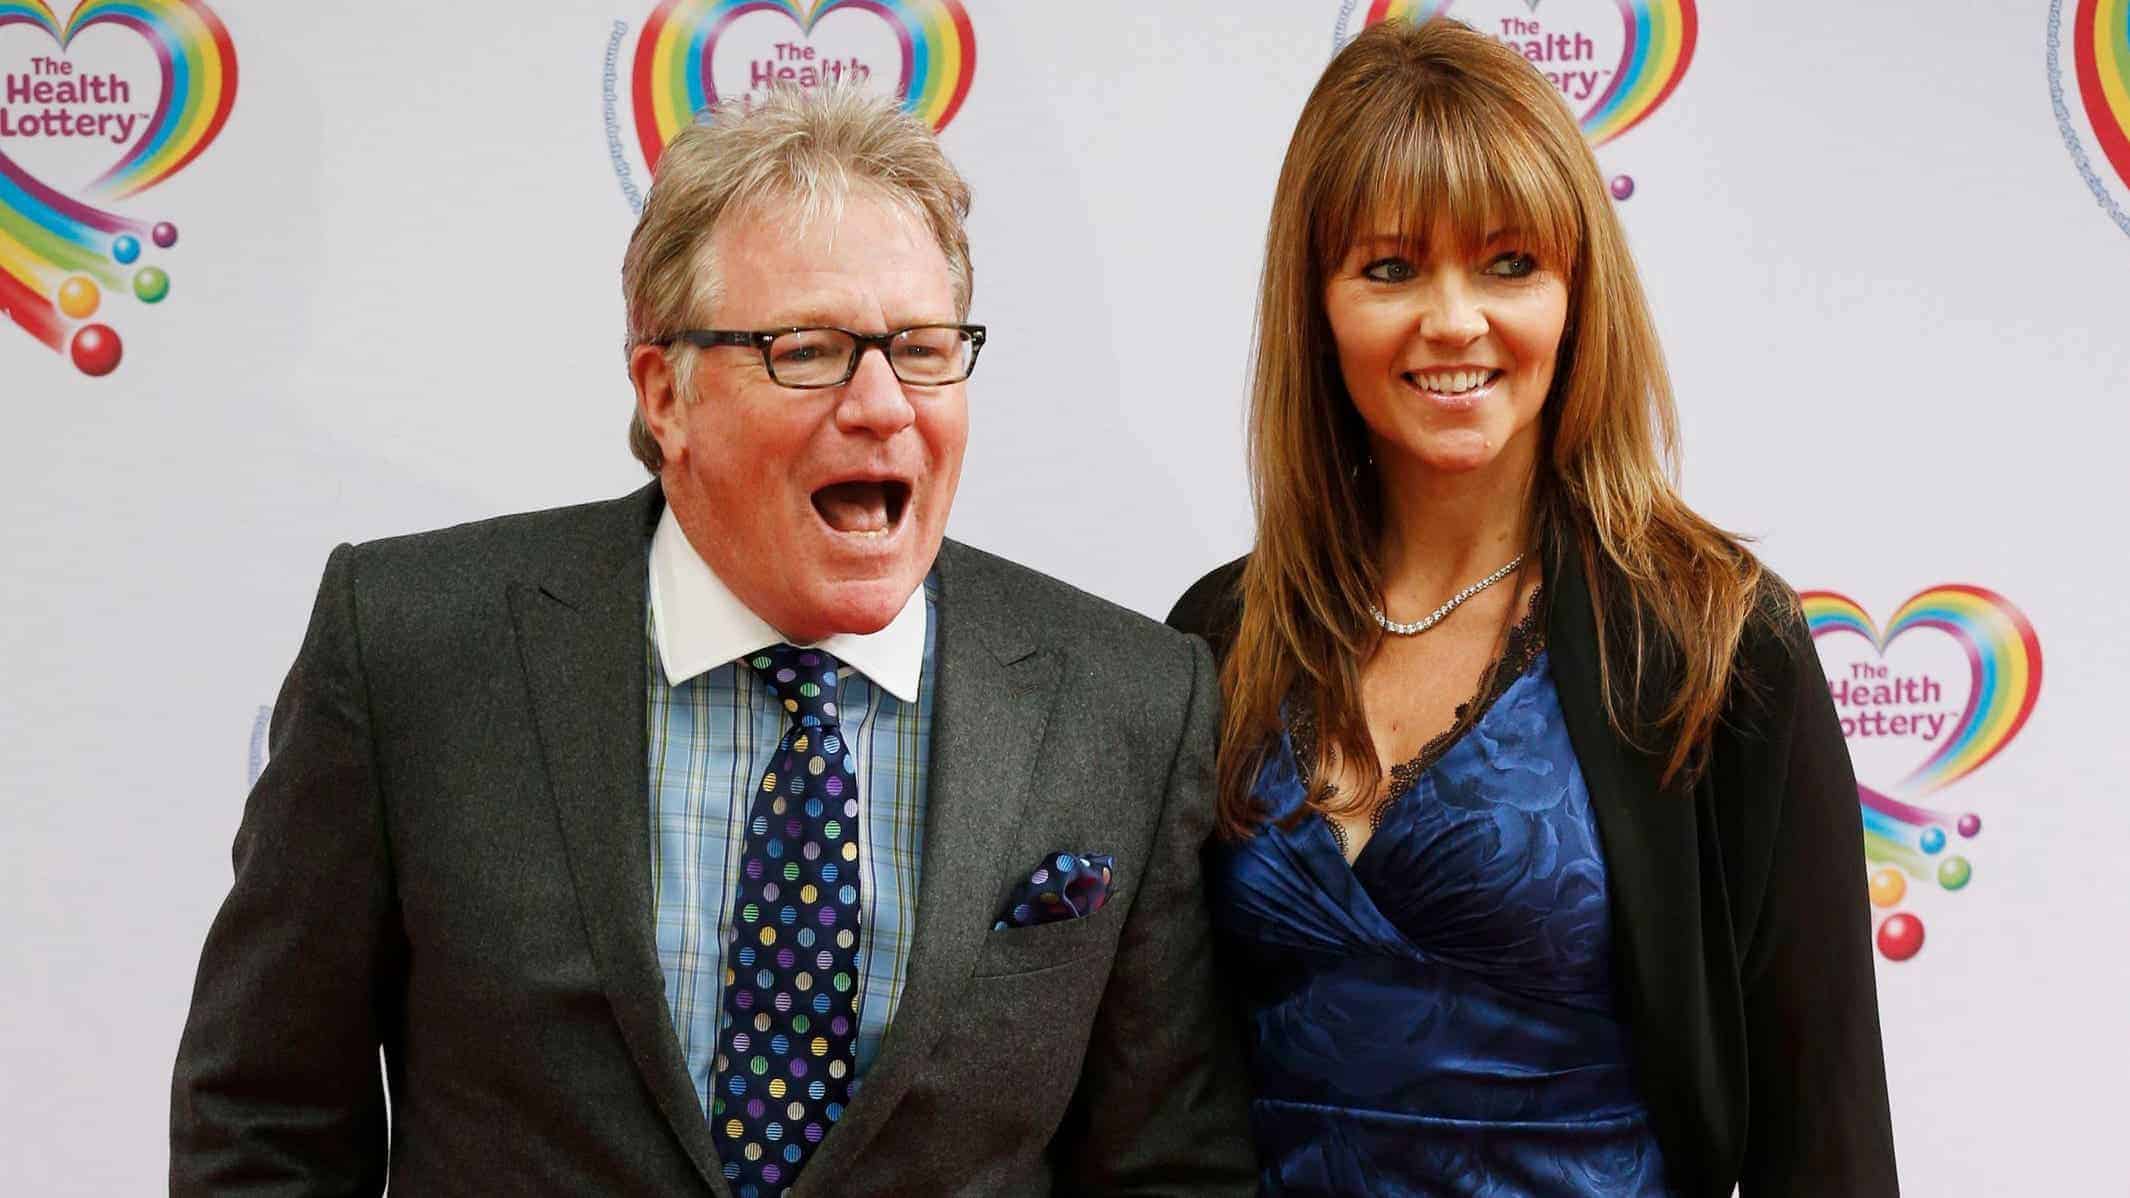 Jim Davidson says Diversity should ‘do a routine about black men mugging people’ in racist rant